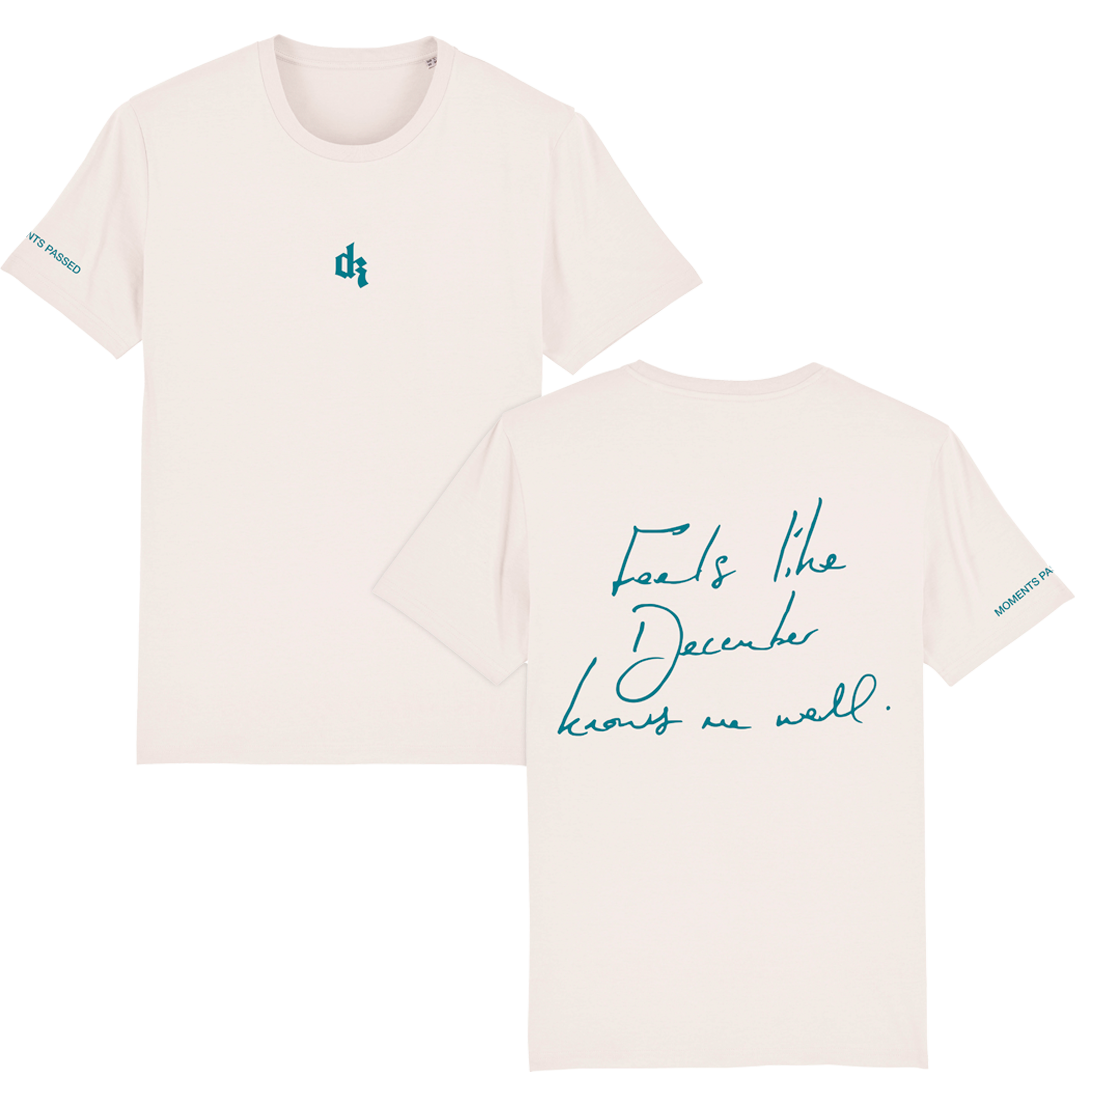 Dermot Kennedy - Moments Passed Vintage White Tee